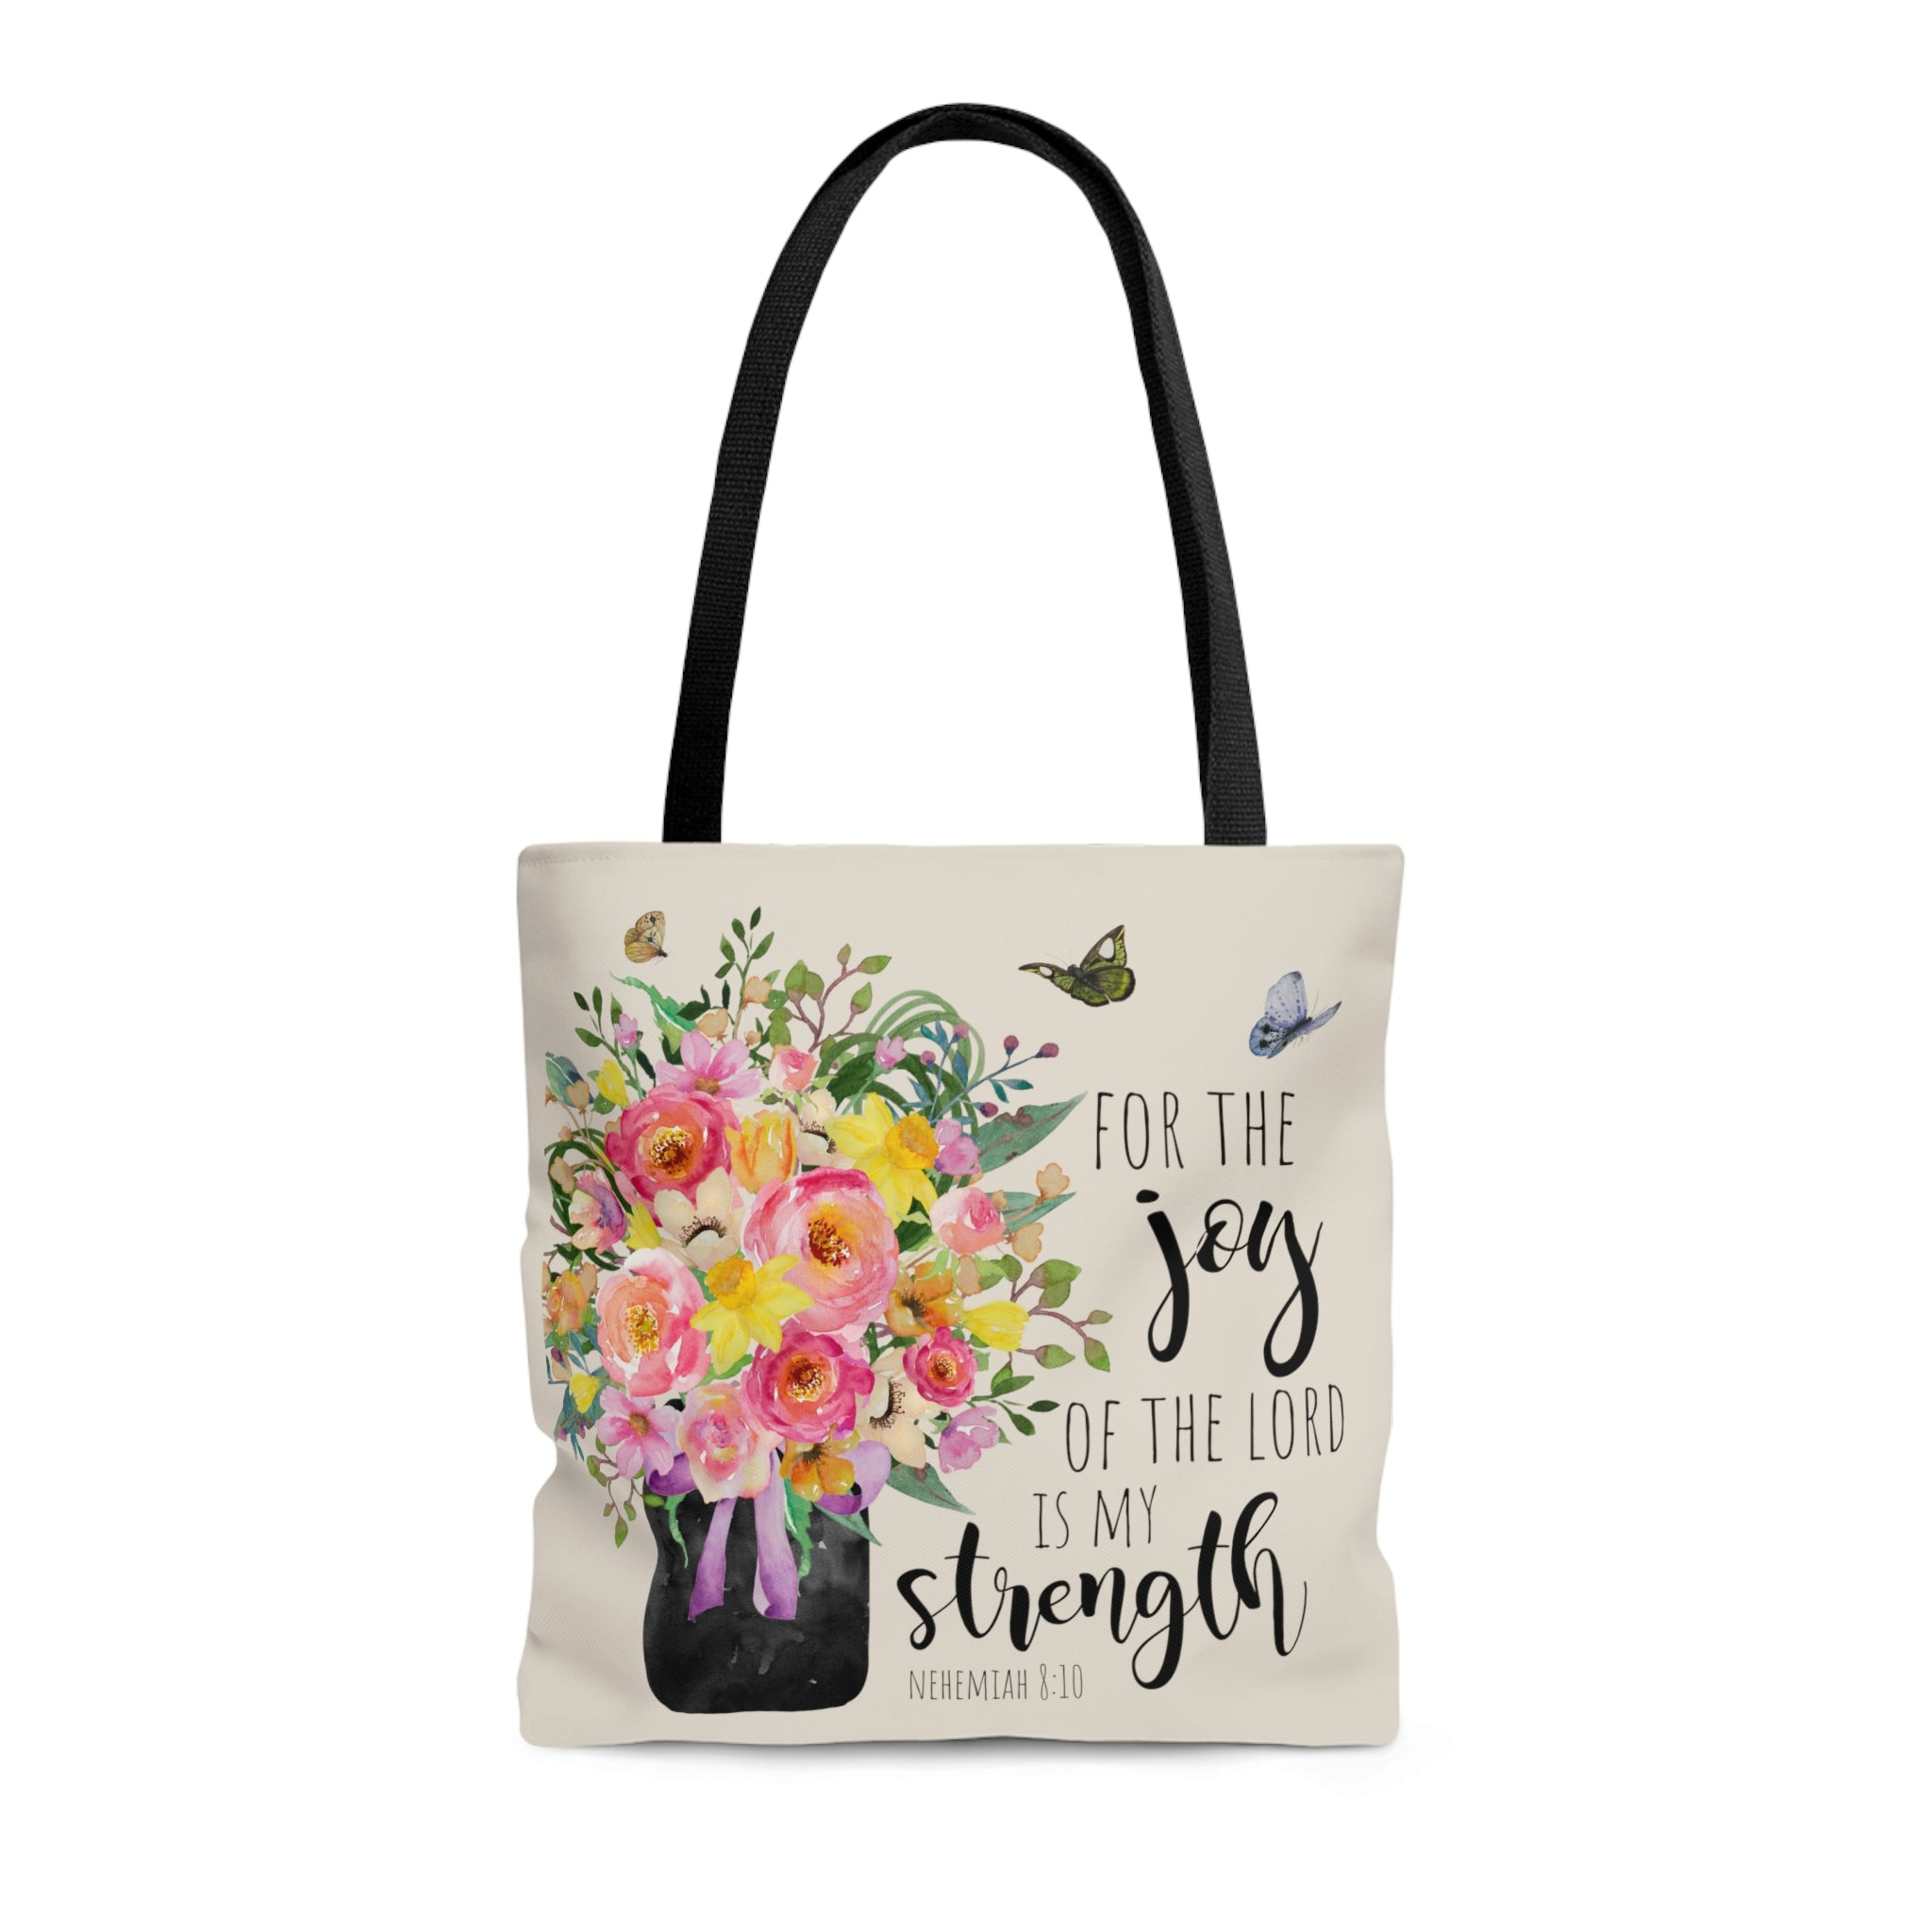 JOY OF THE LORD - Tote